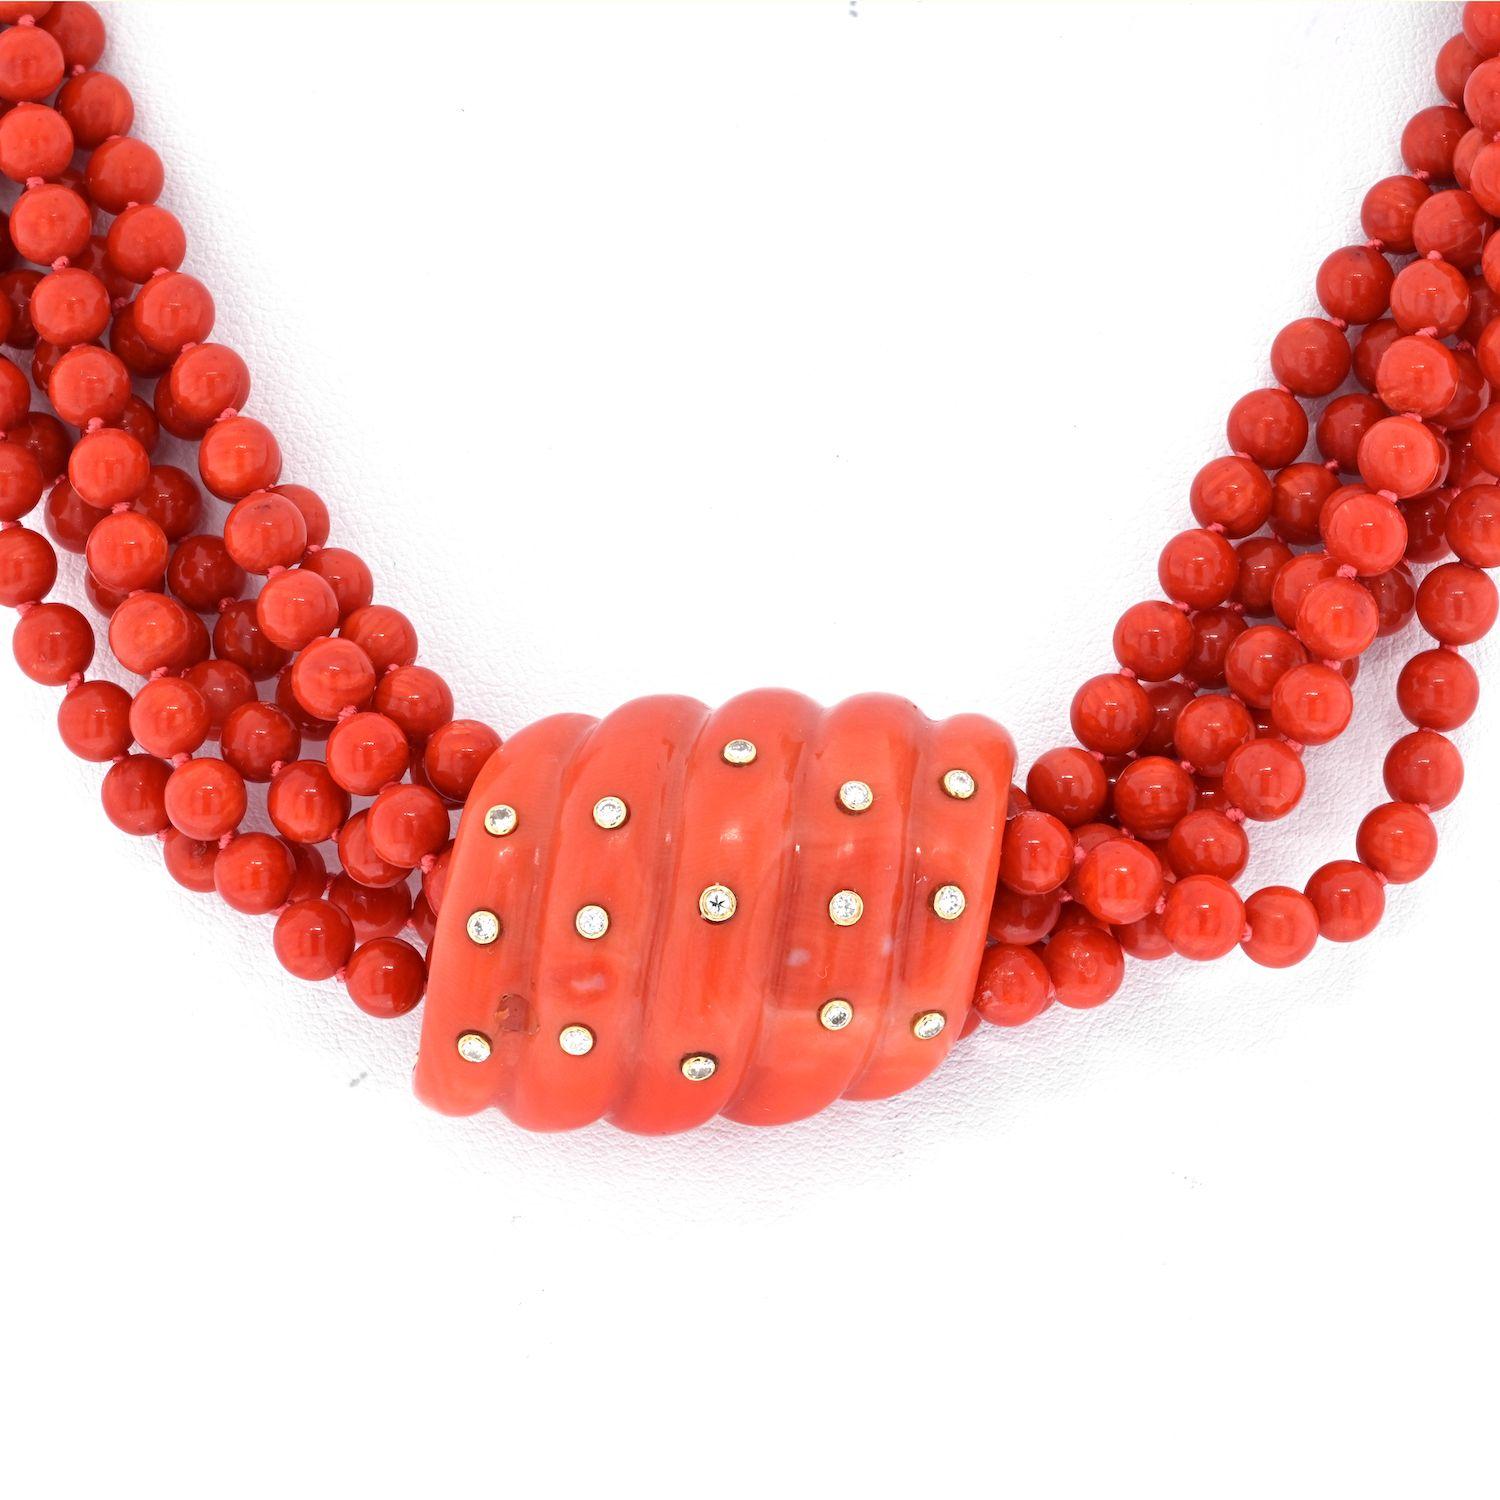 Of 6 beaded coral strands, joined by a fluted coral and round brilliant-cut diamond clasp
18K Yellow Gold. 
18 inches. 
The necklace is finished with a substantial clasp that is further adorned with diamonds.